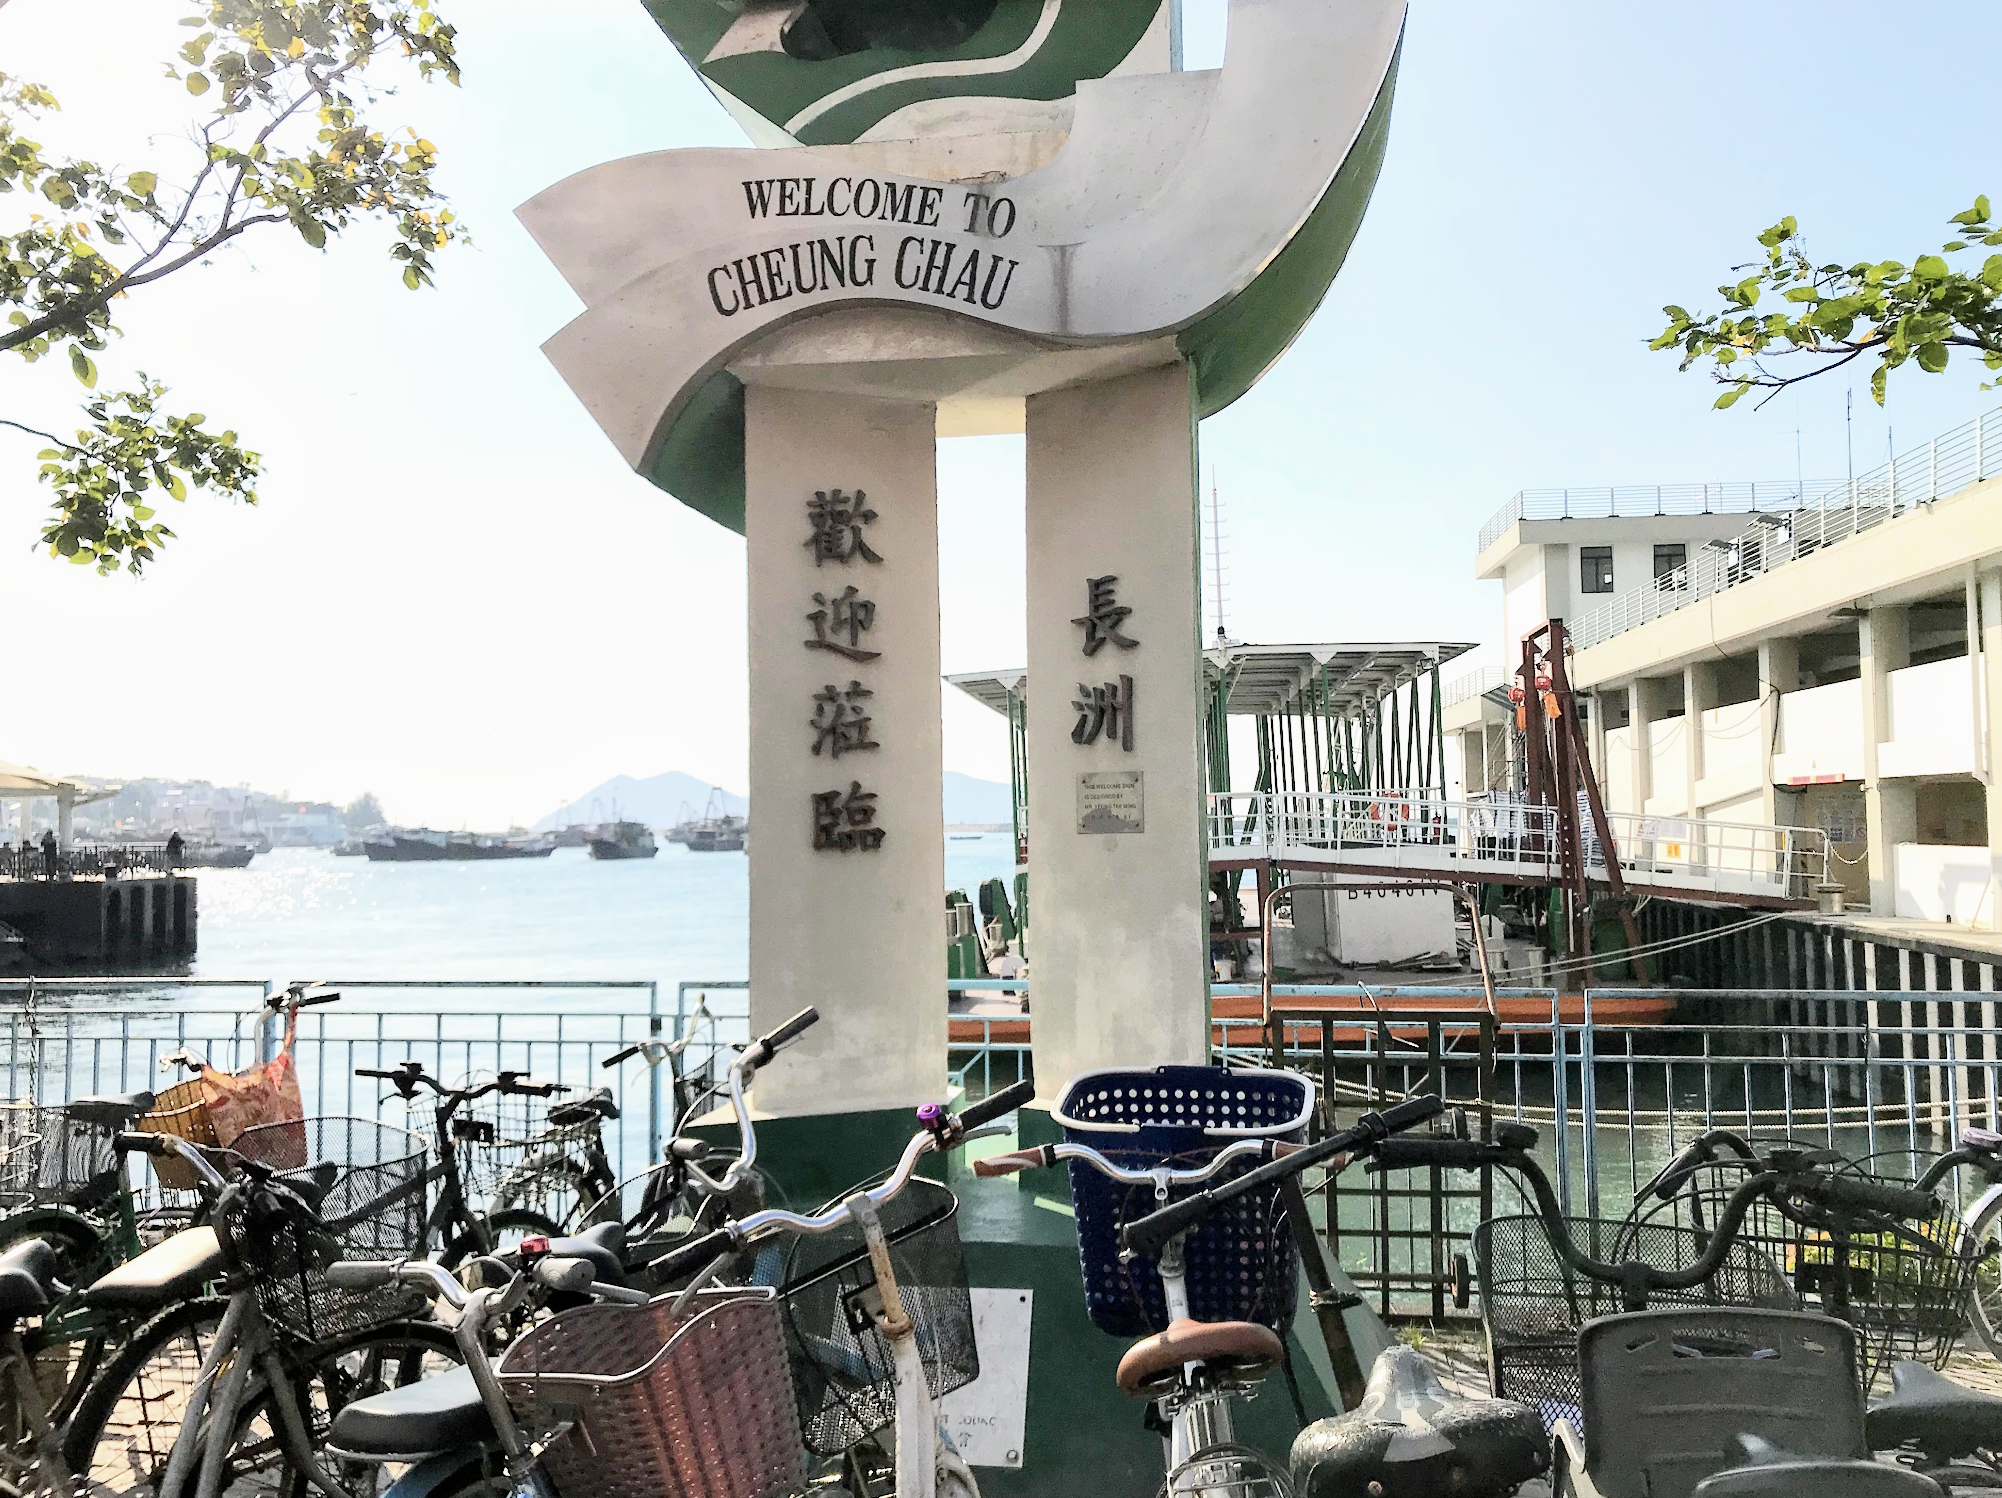 Cheung Chau Island - How to get there?